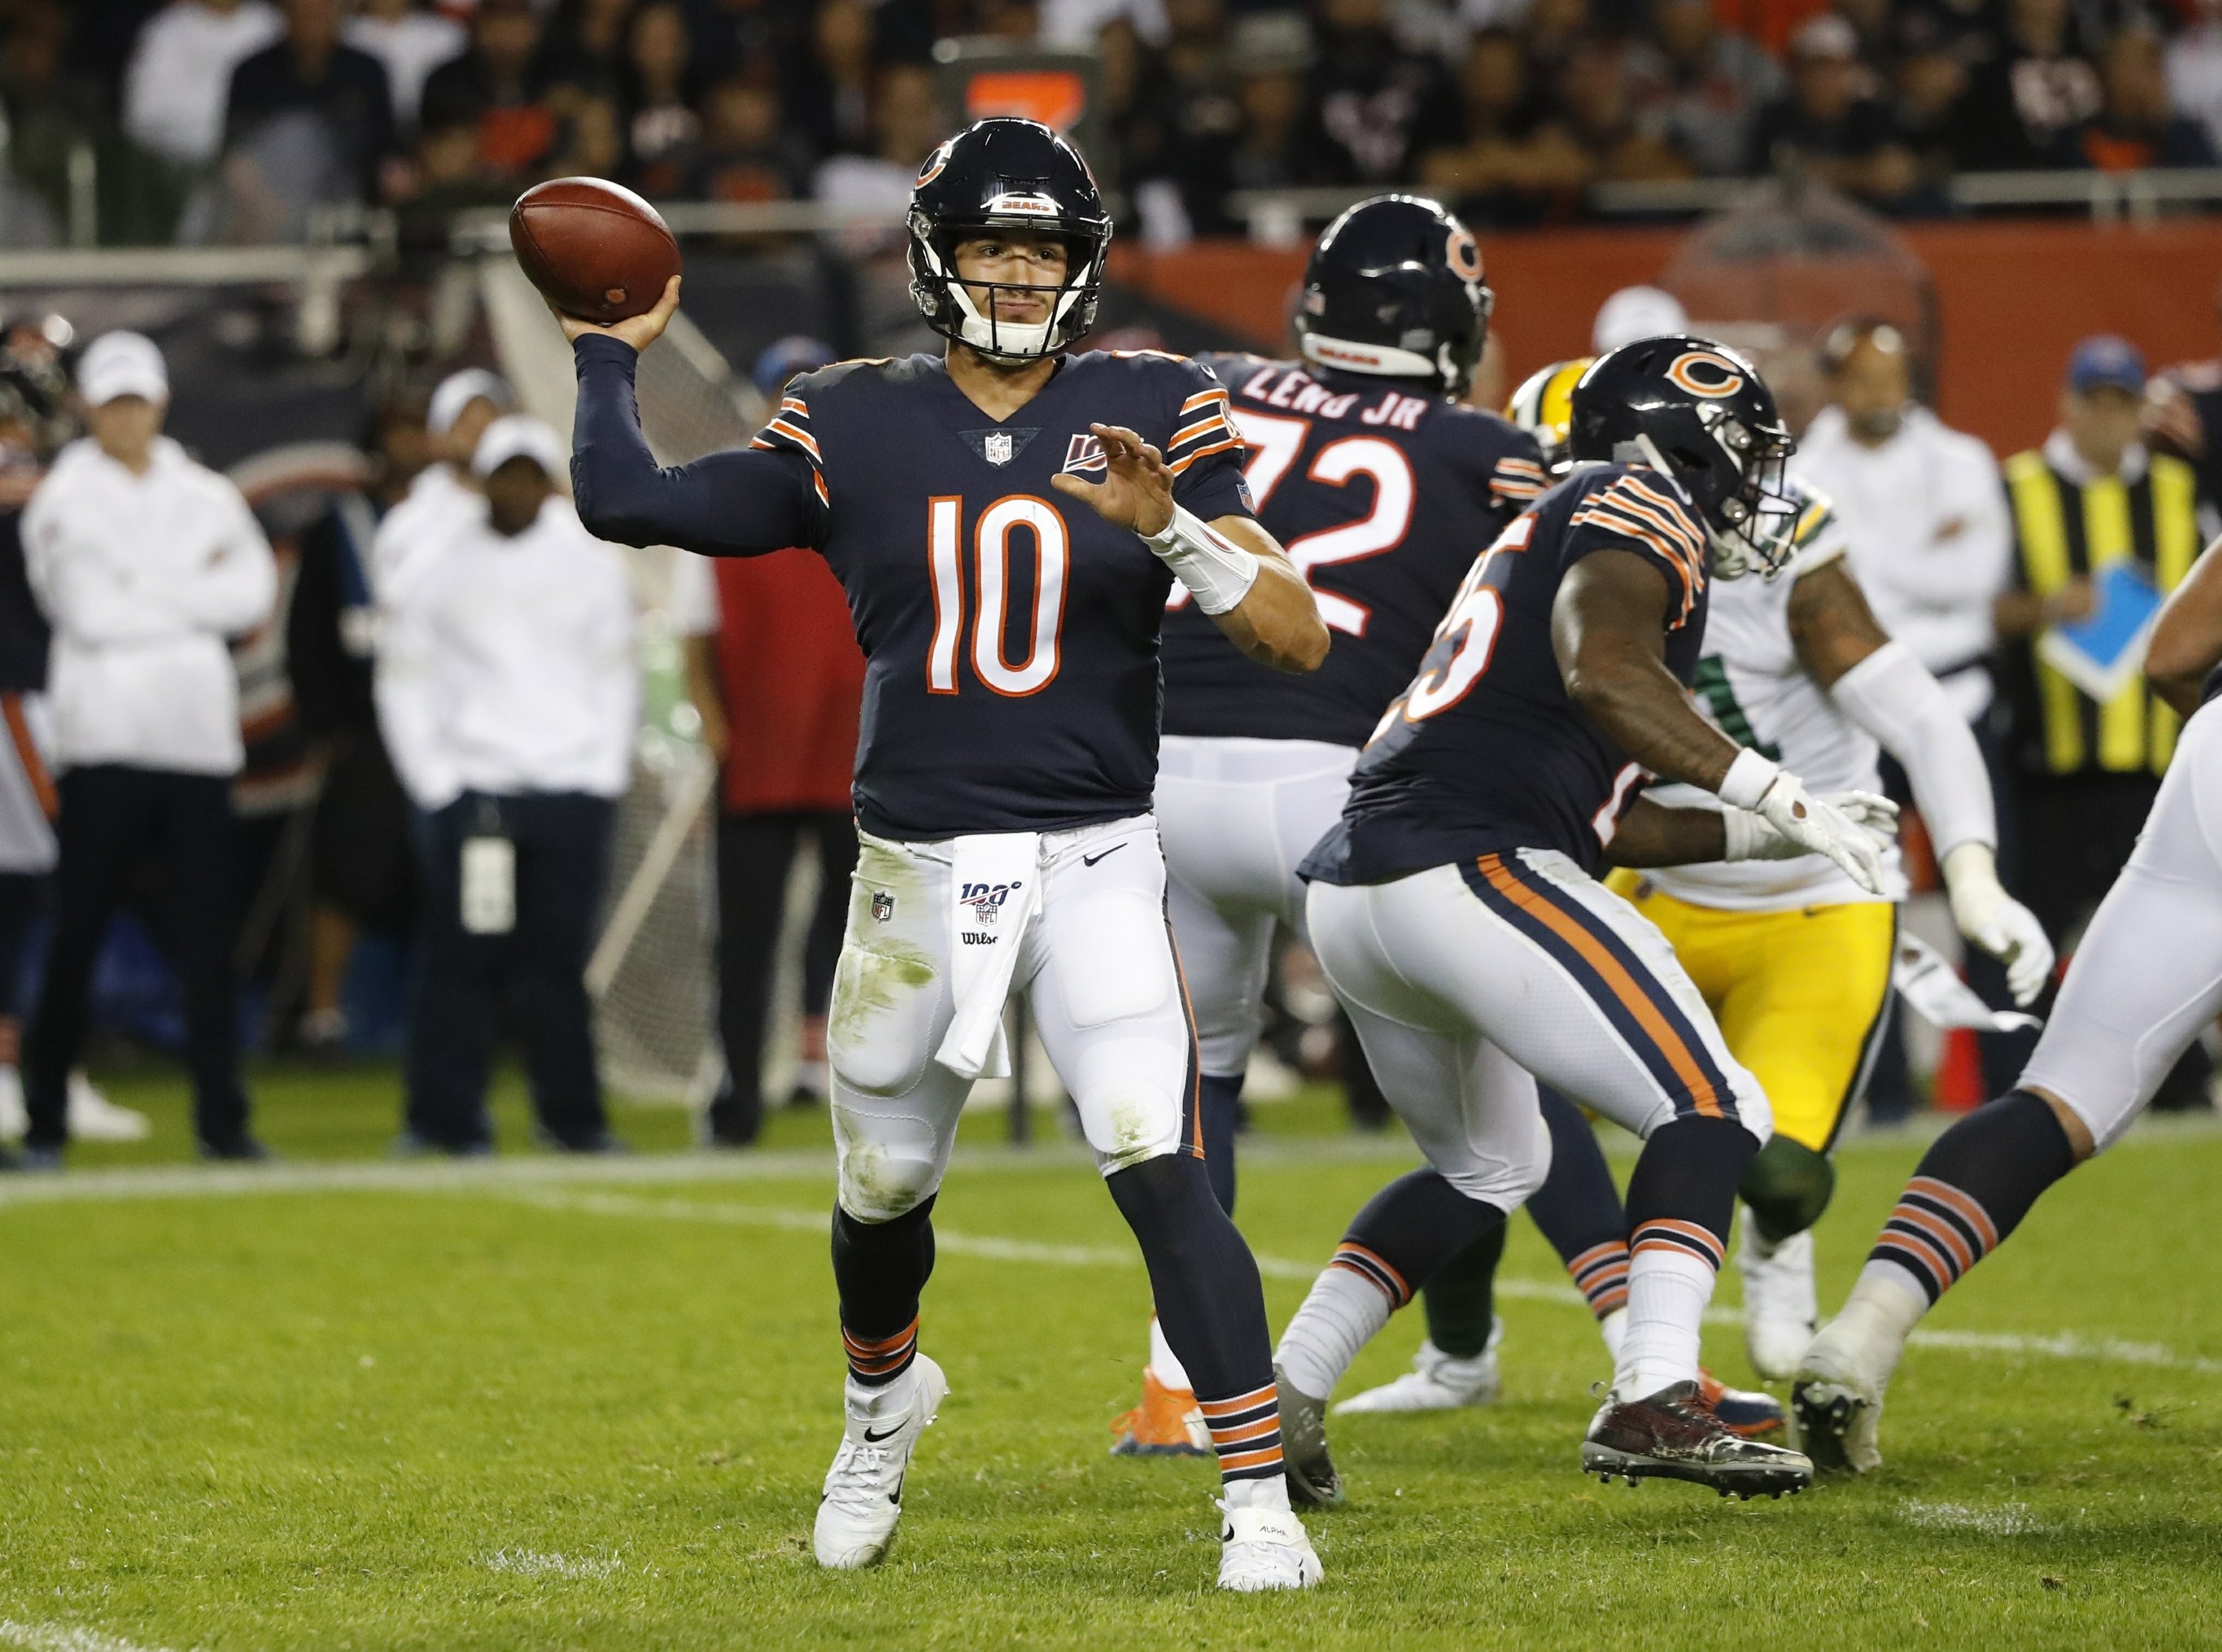 Bears’ offense struggles in opening loss to Packers